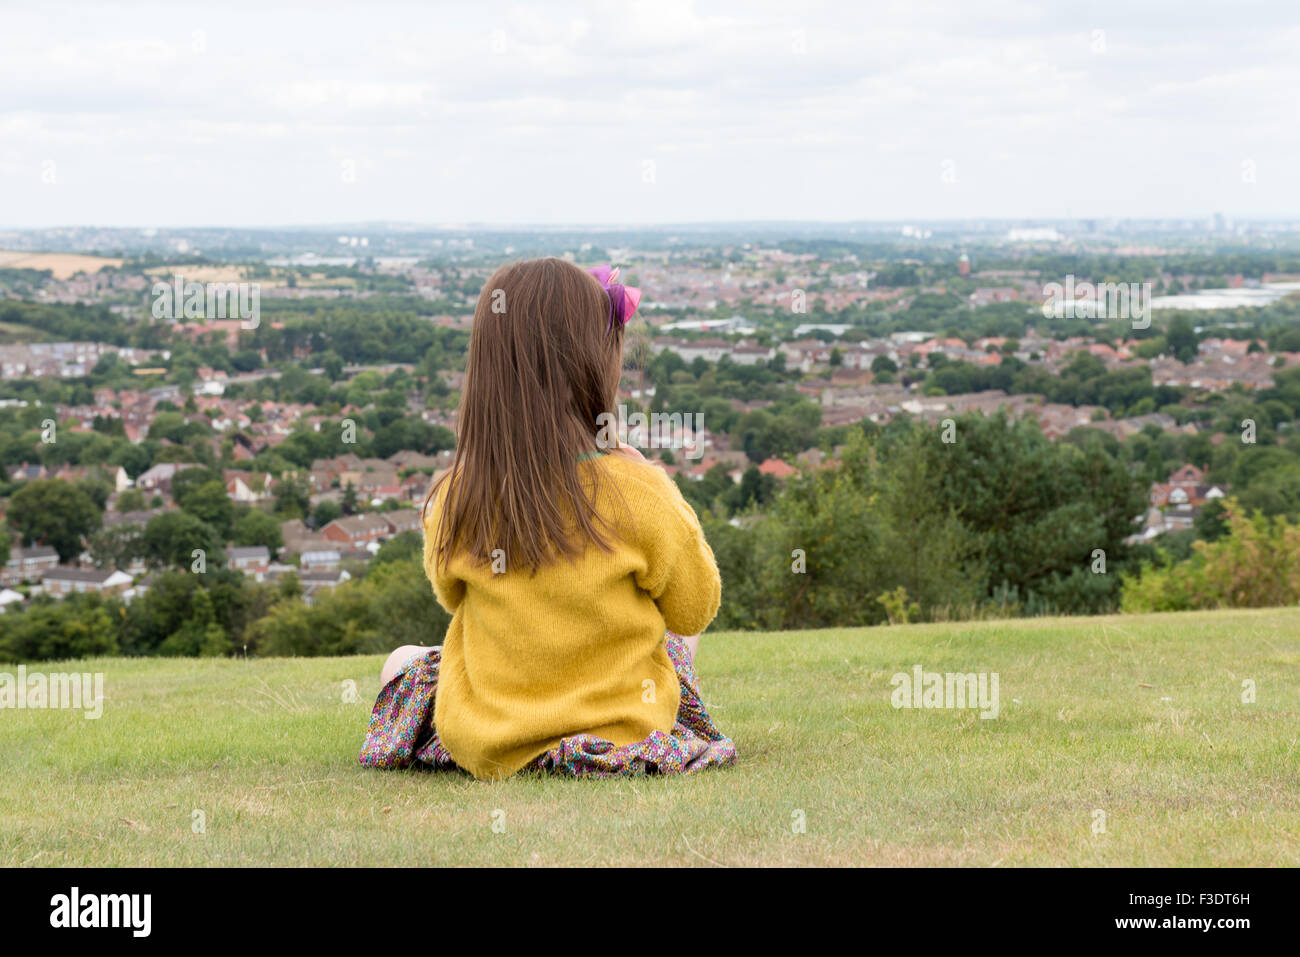 Young girl  Looking at the City from Afar Stock Photo